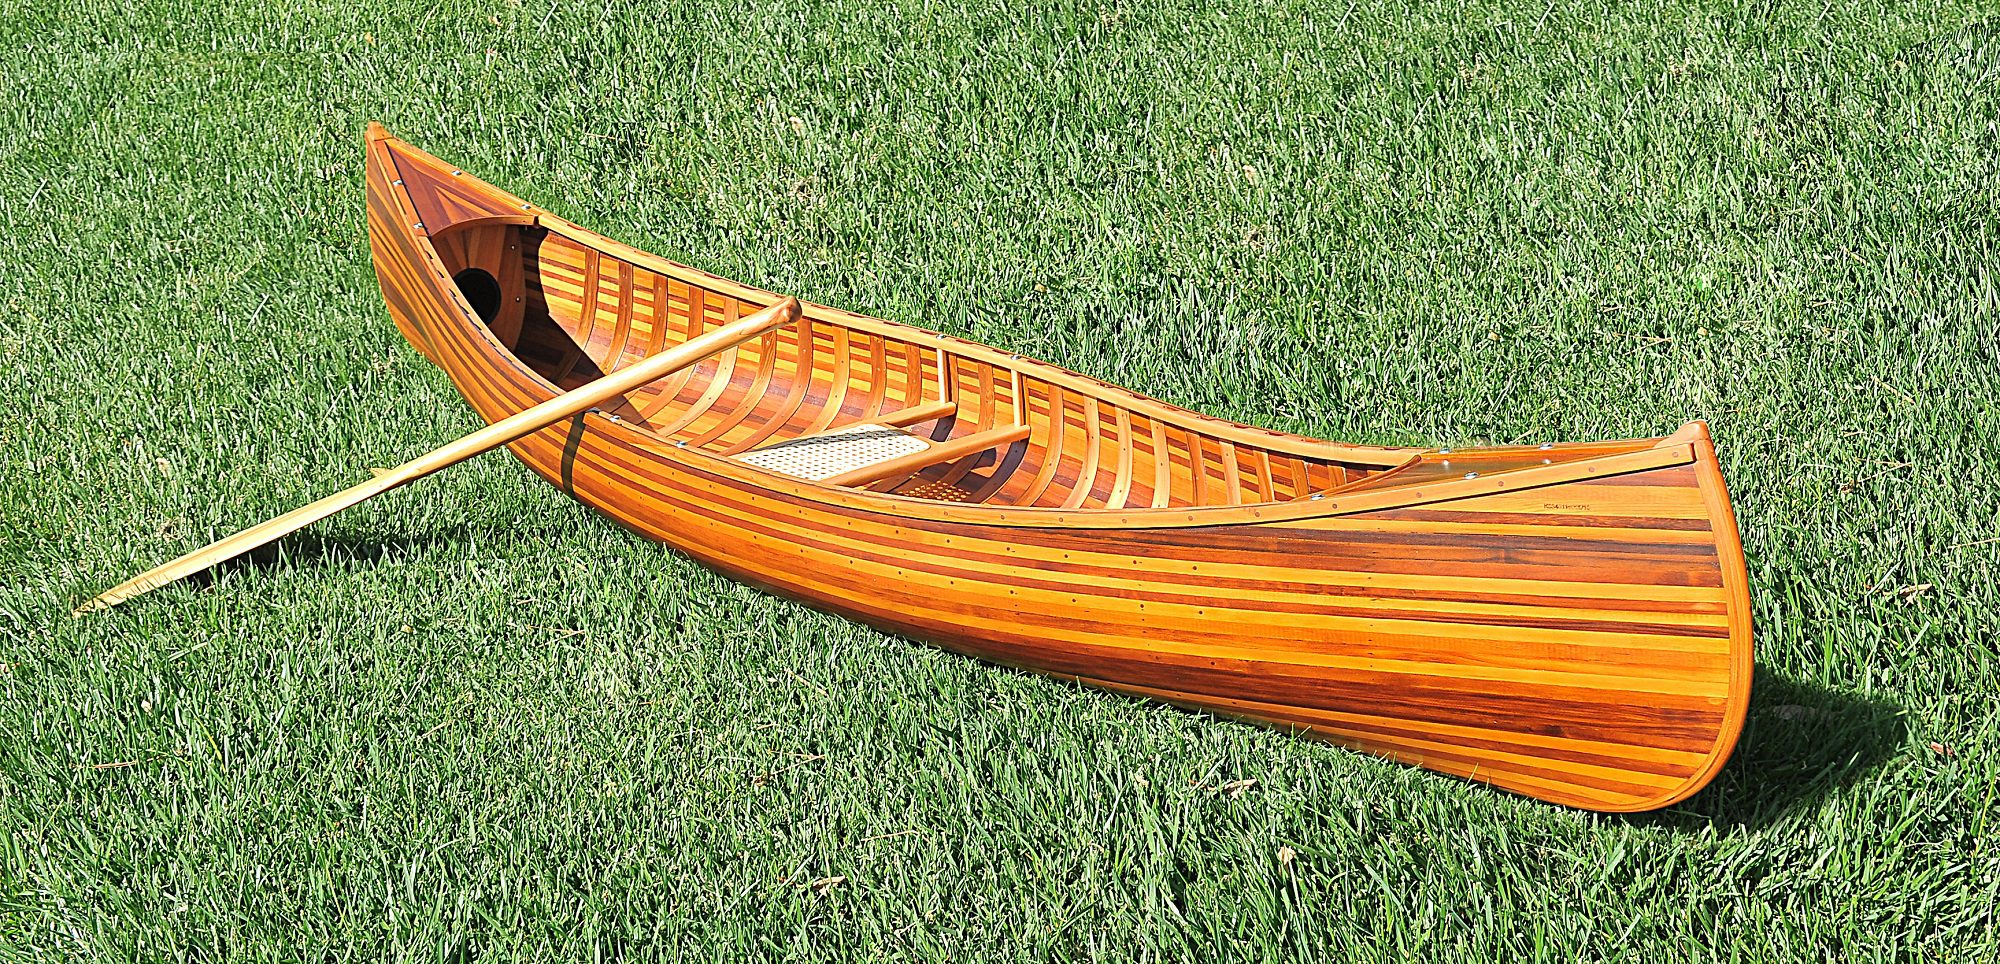 Buy wooden canoe with ribs curved bow matte finish 10 ft